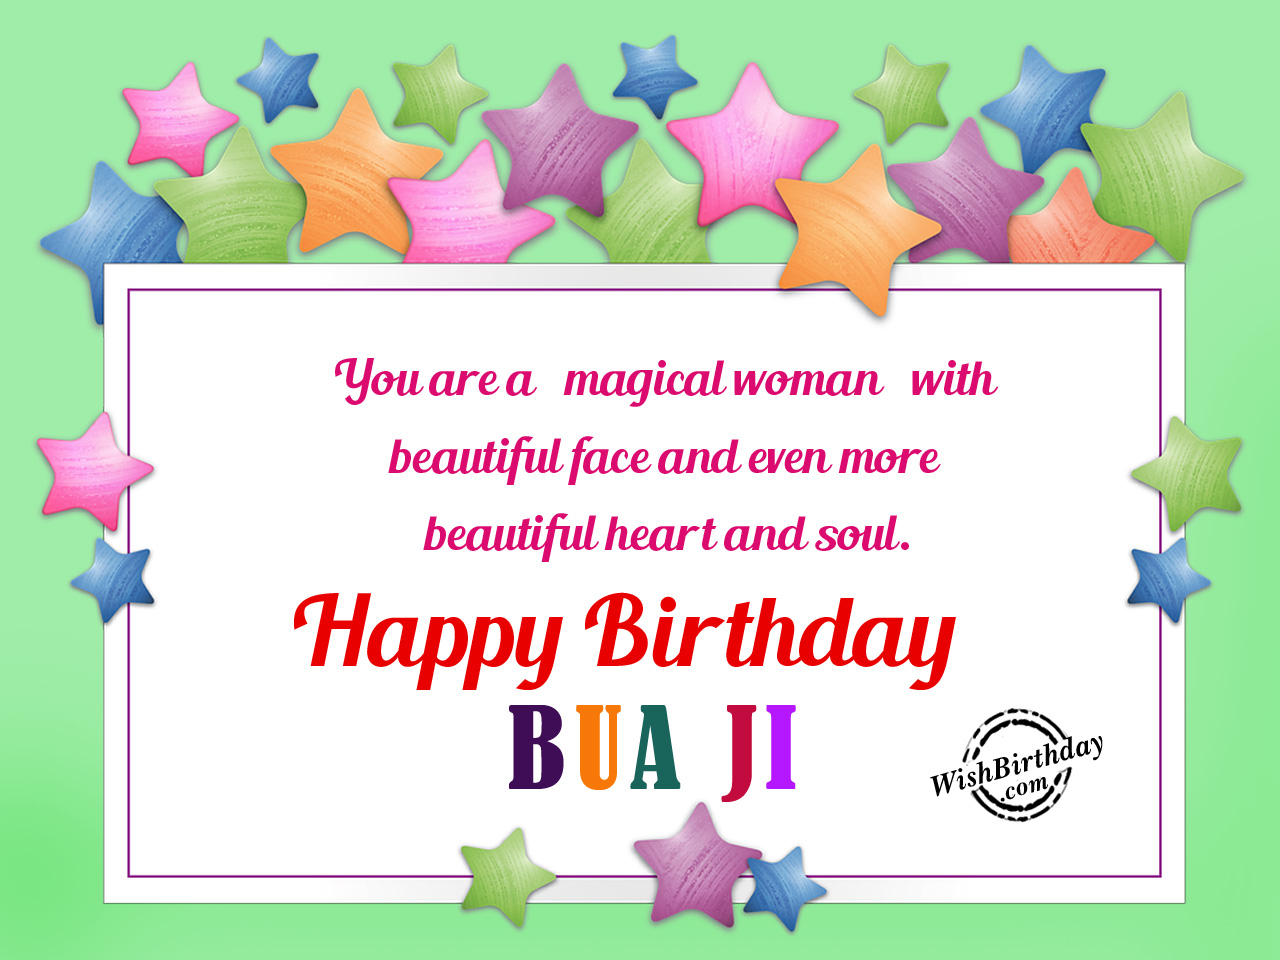 Birthday Wishes For Bua Ji Birthday Images Pictures